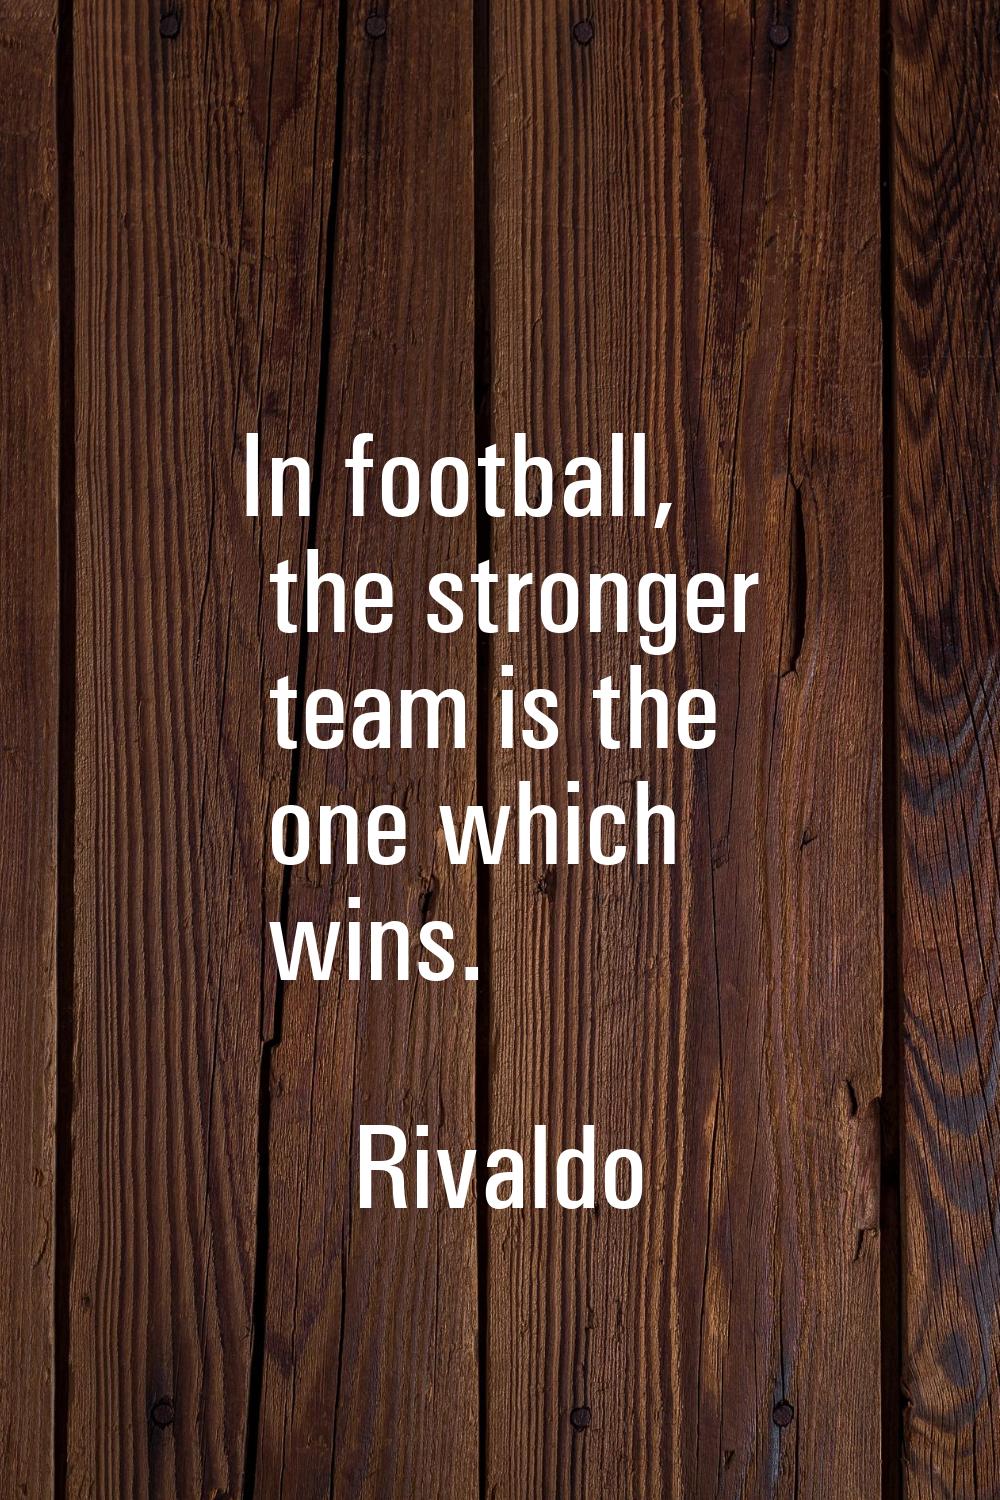 In football, the stronger team is the one which wins.